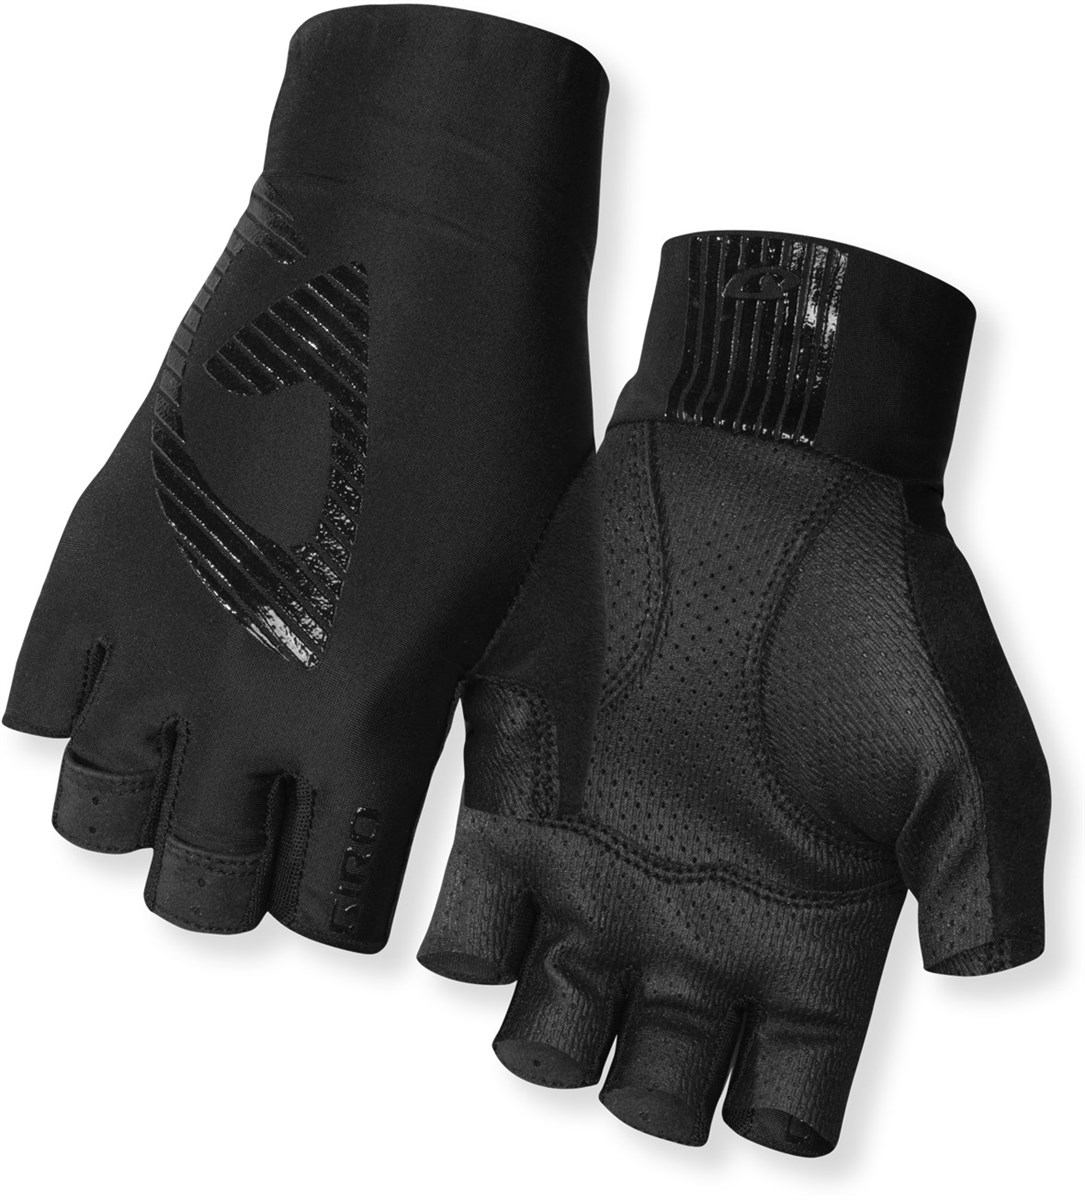 Giro LTZ Mitts Short Finger Cycling Gloves product image